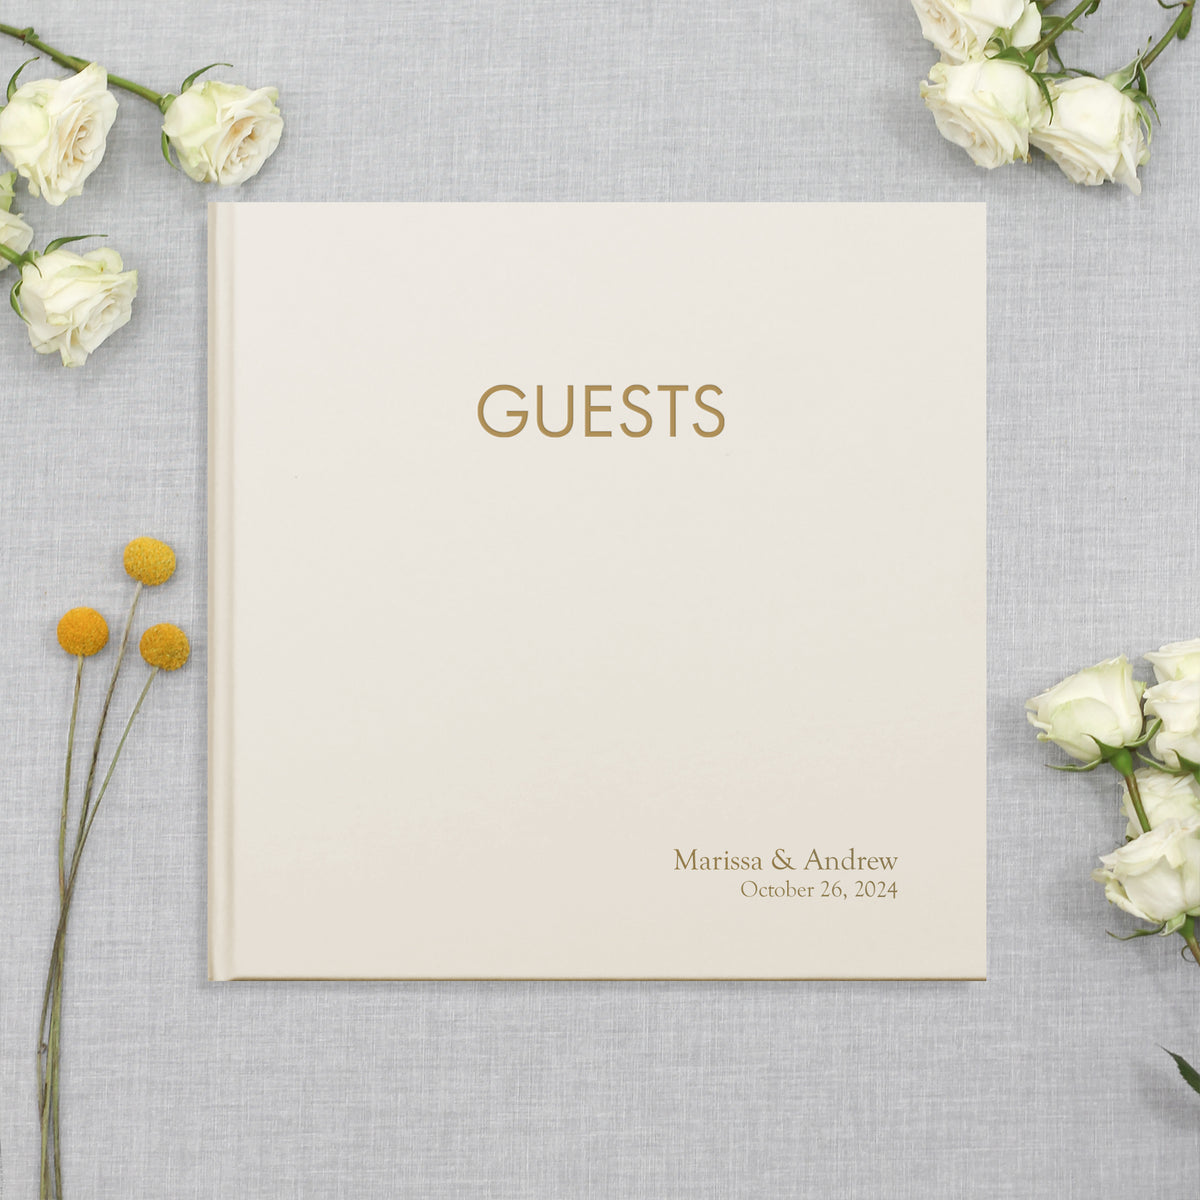 Event Guestbook | Cover: Pearl Vegan Leather | Available Personalized